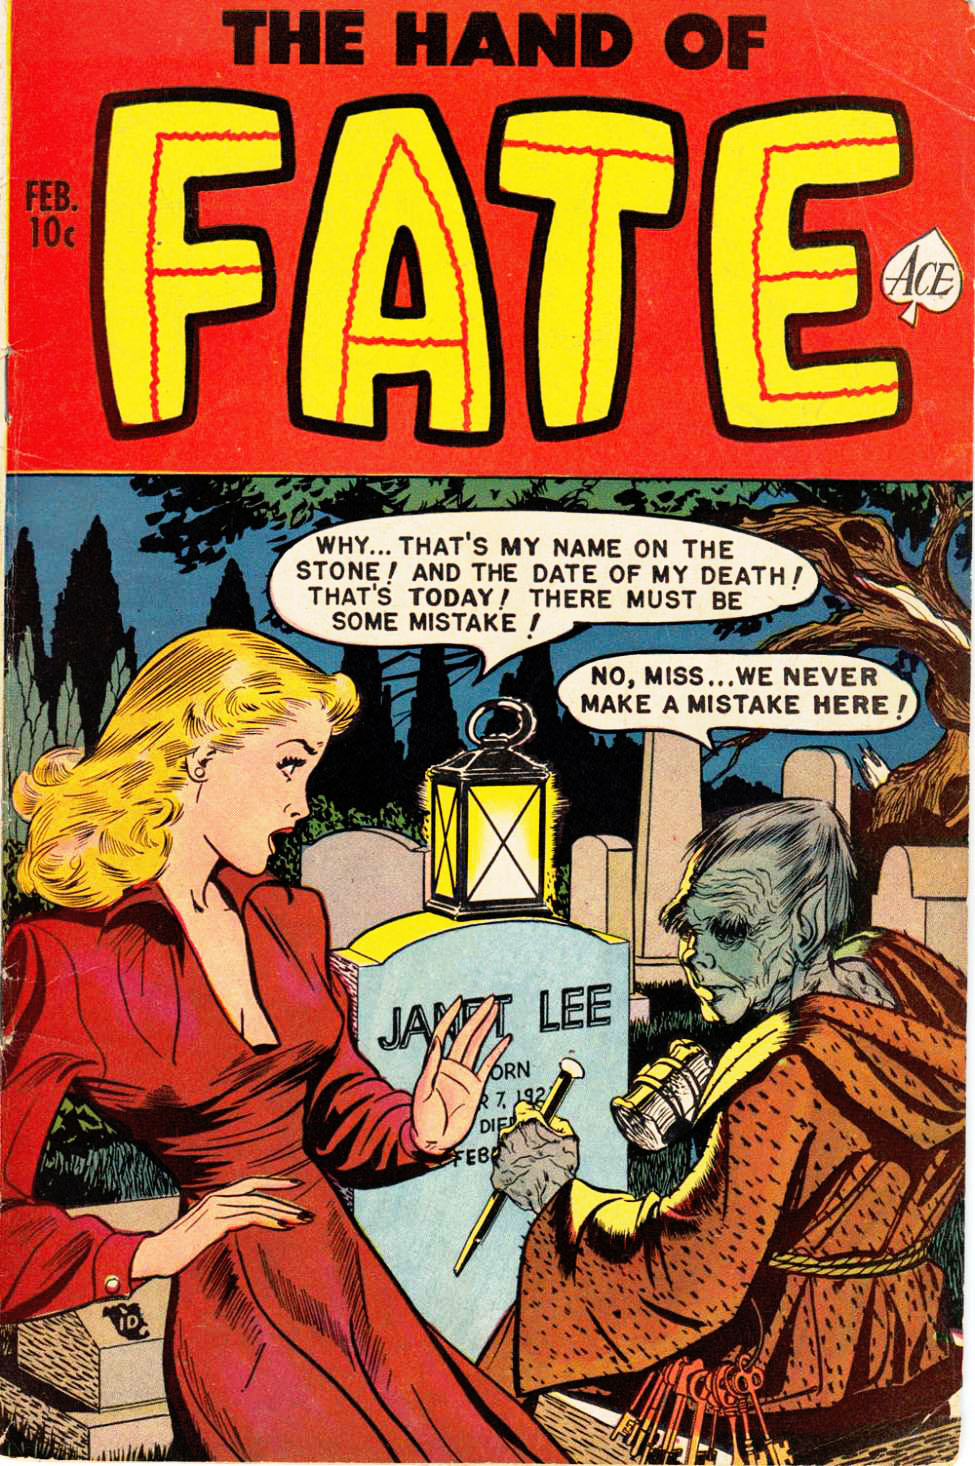 Hand of Fate #9 by Ace